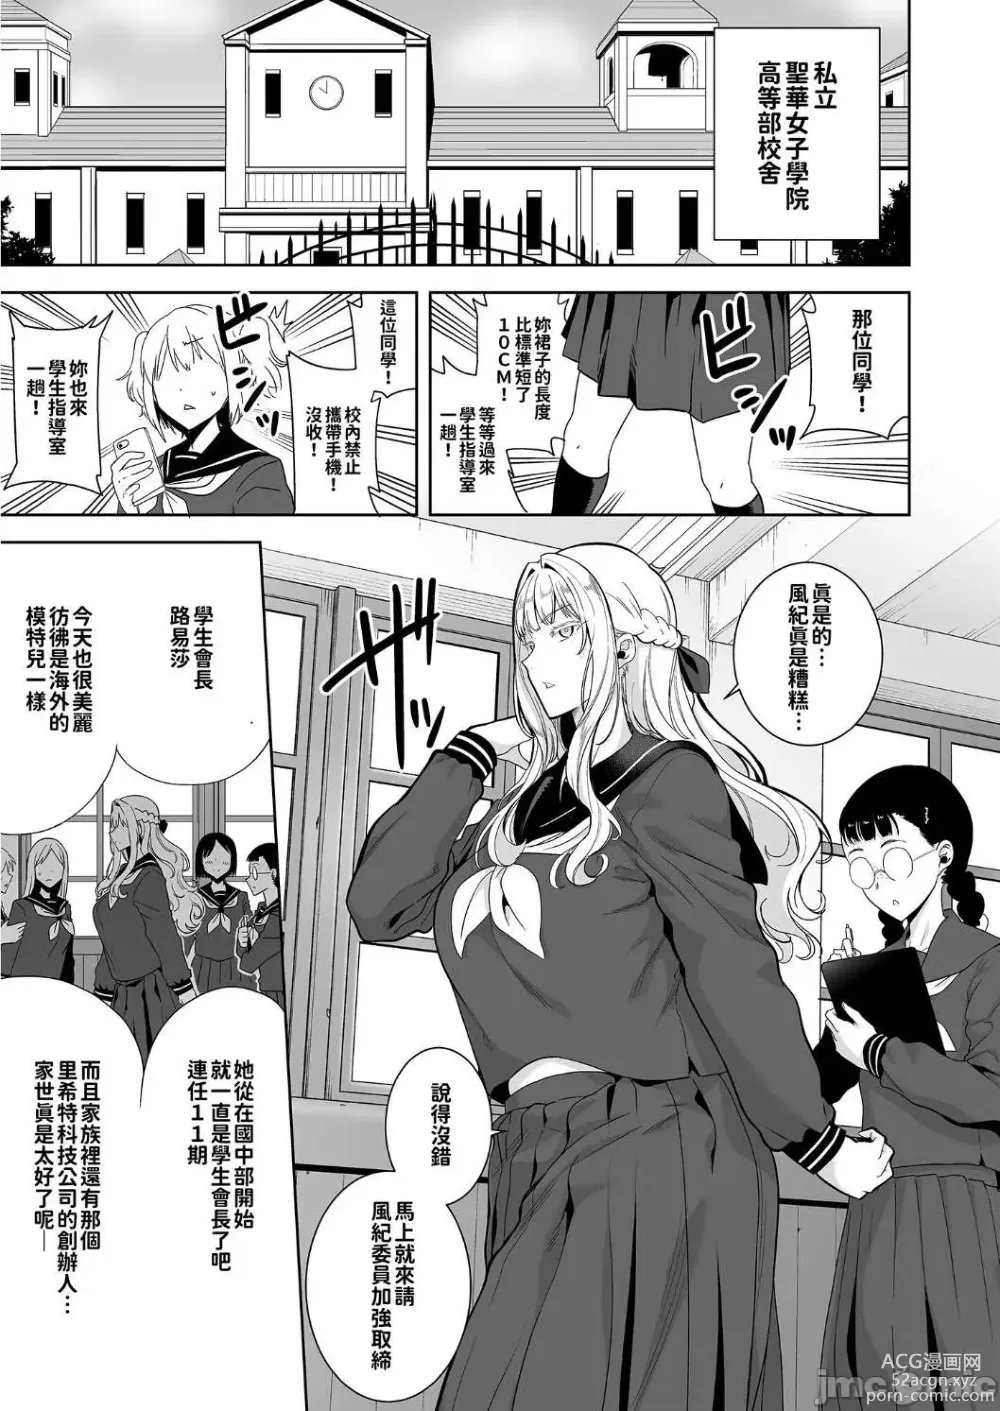 Page 3 of doujinshi 聖華女学院高等部公認竿おじさん 4